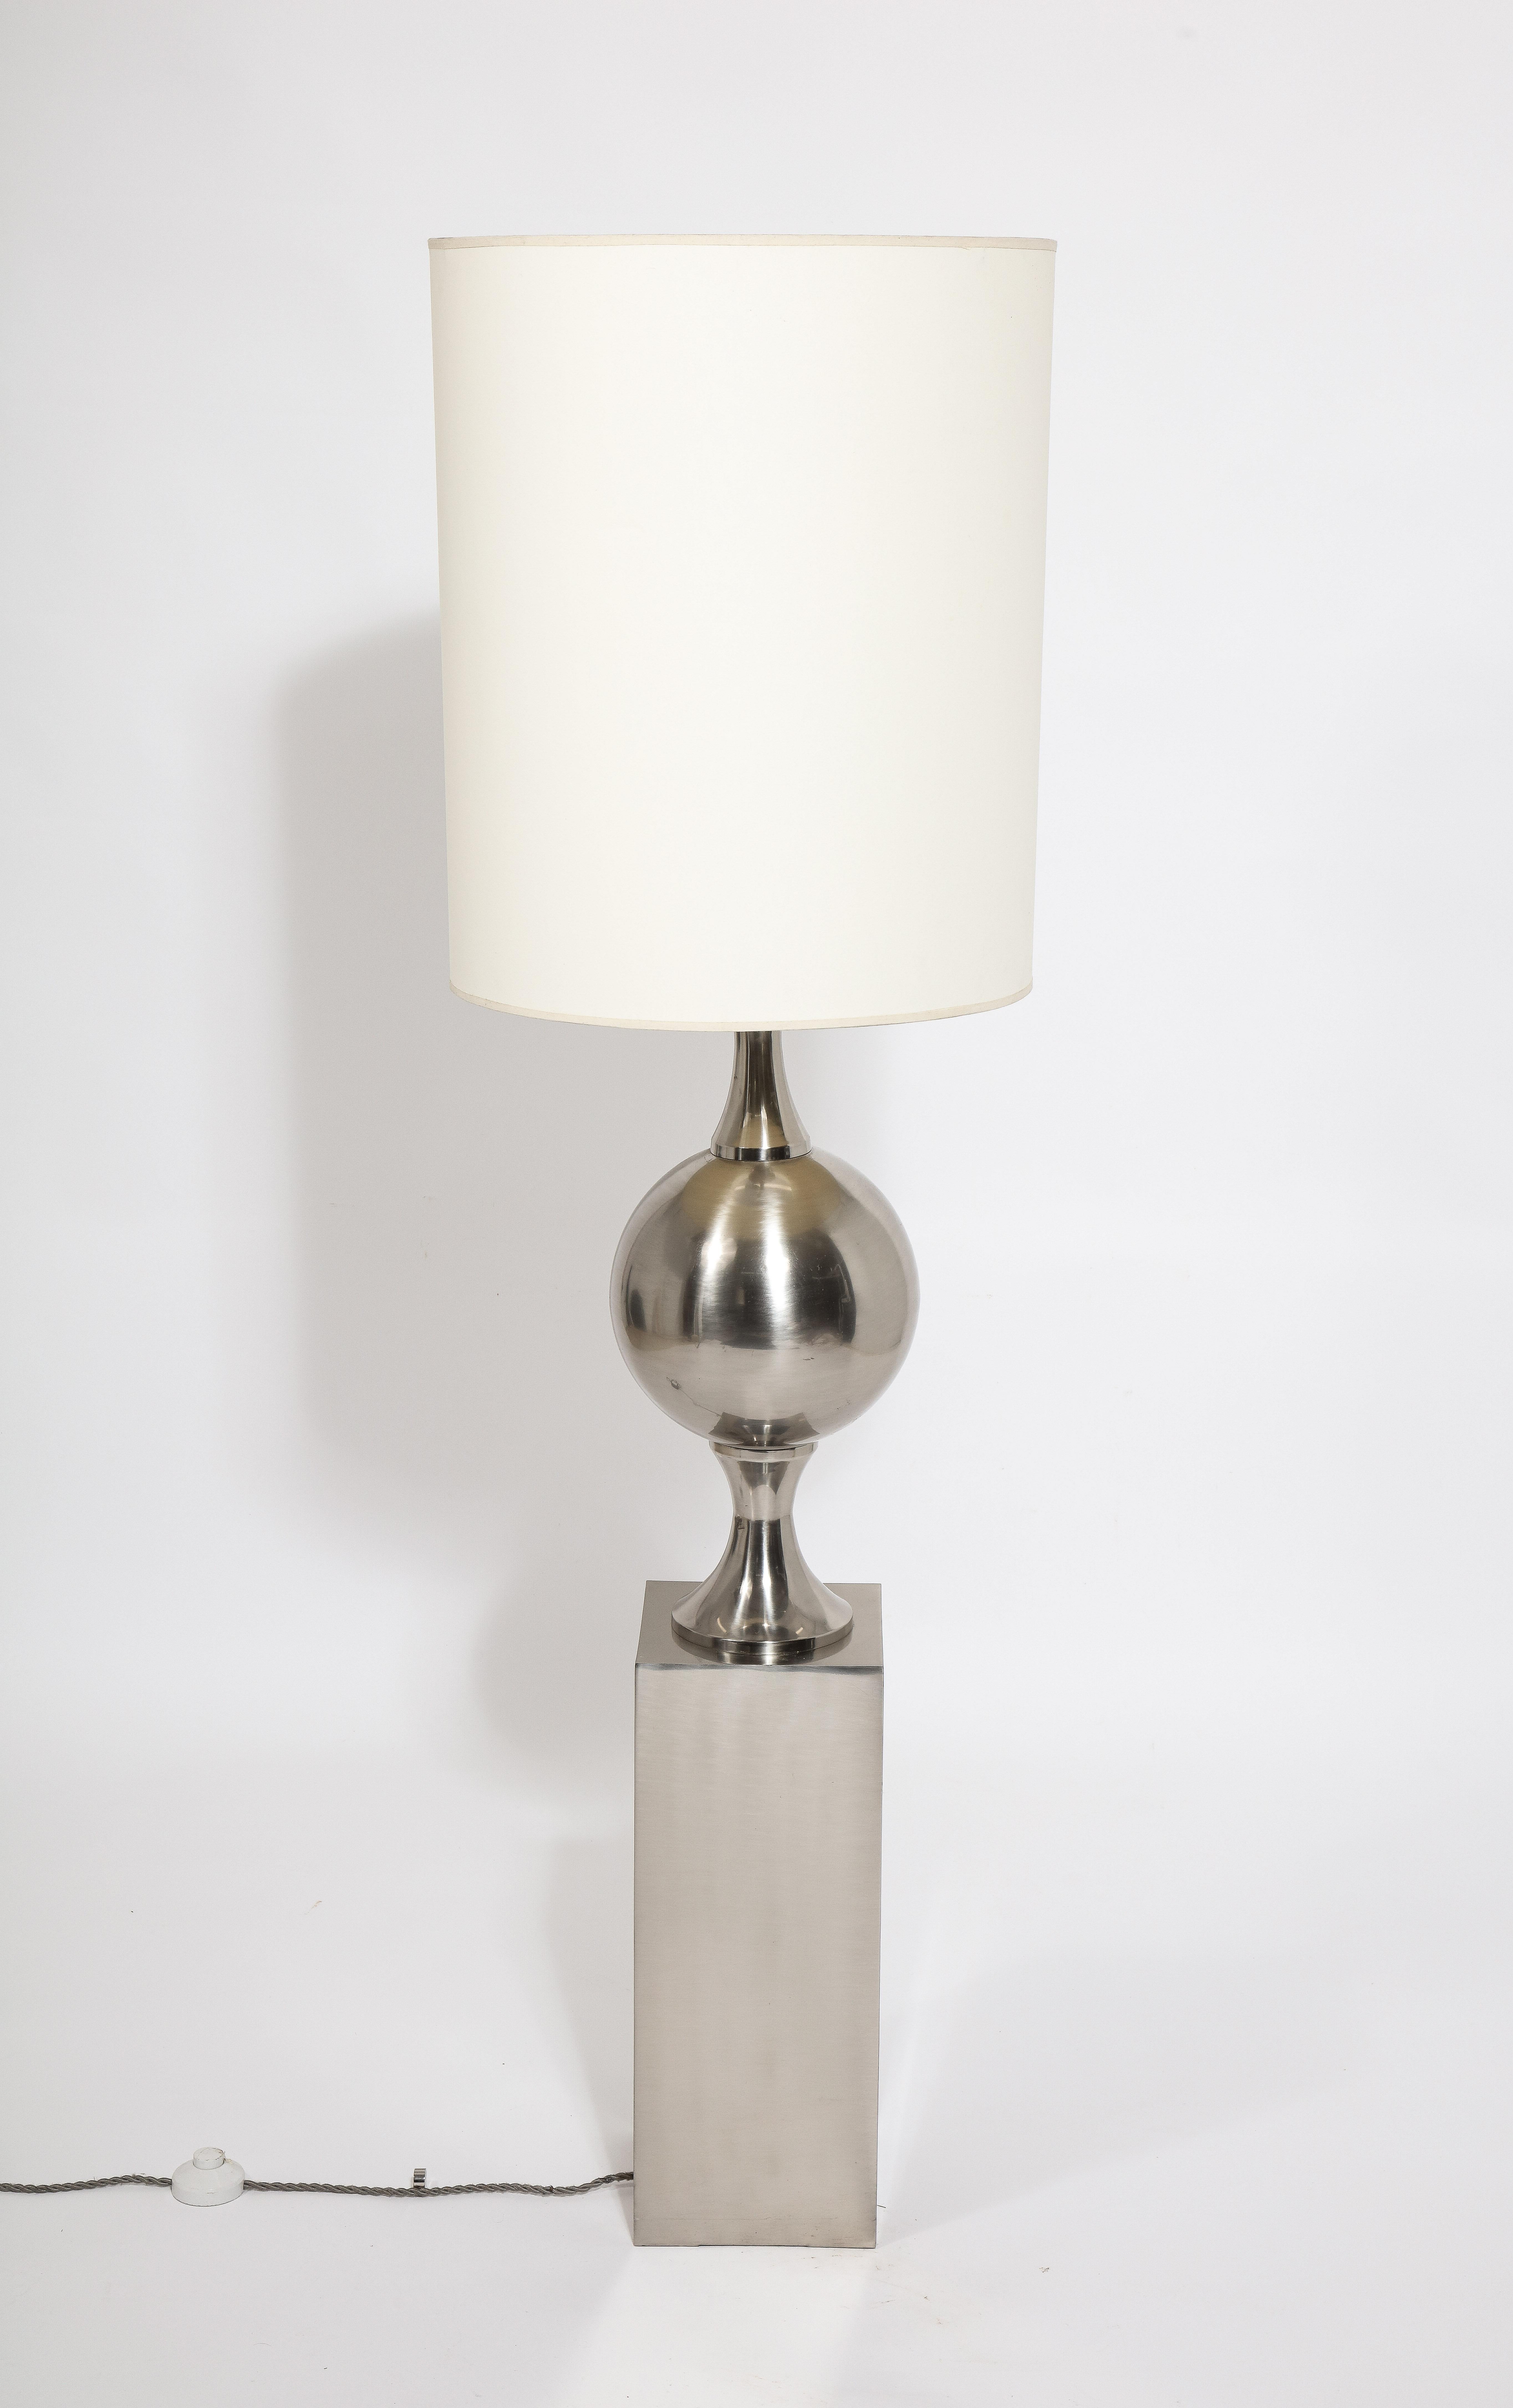 Barbier Floor Lamp in Nickel Plated Brass, France 1970's For Sale 2